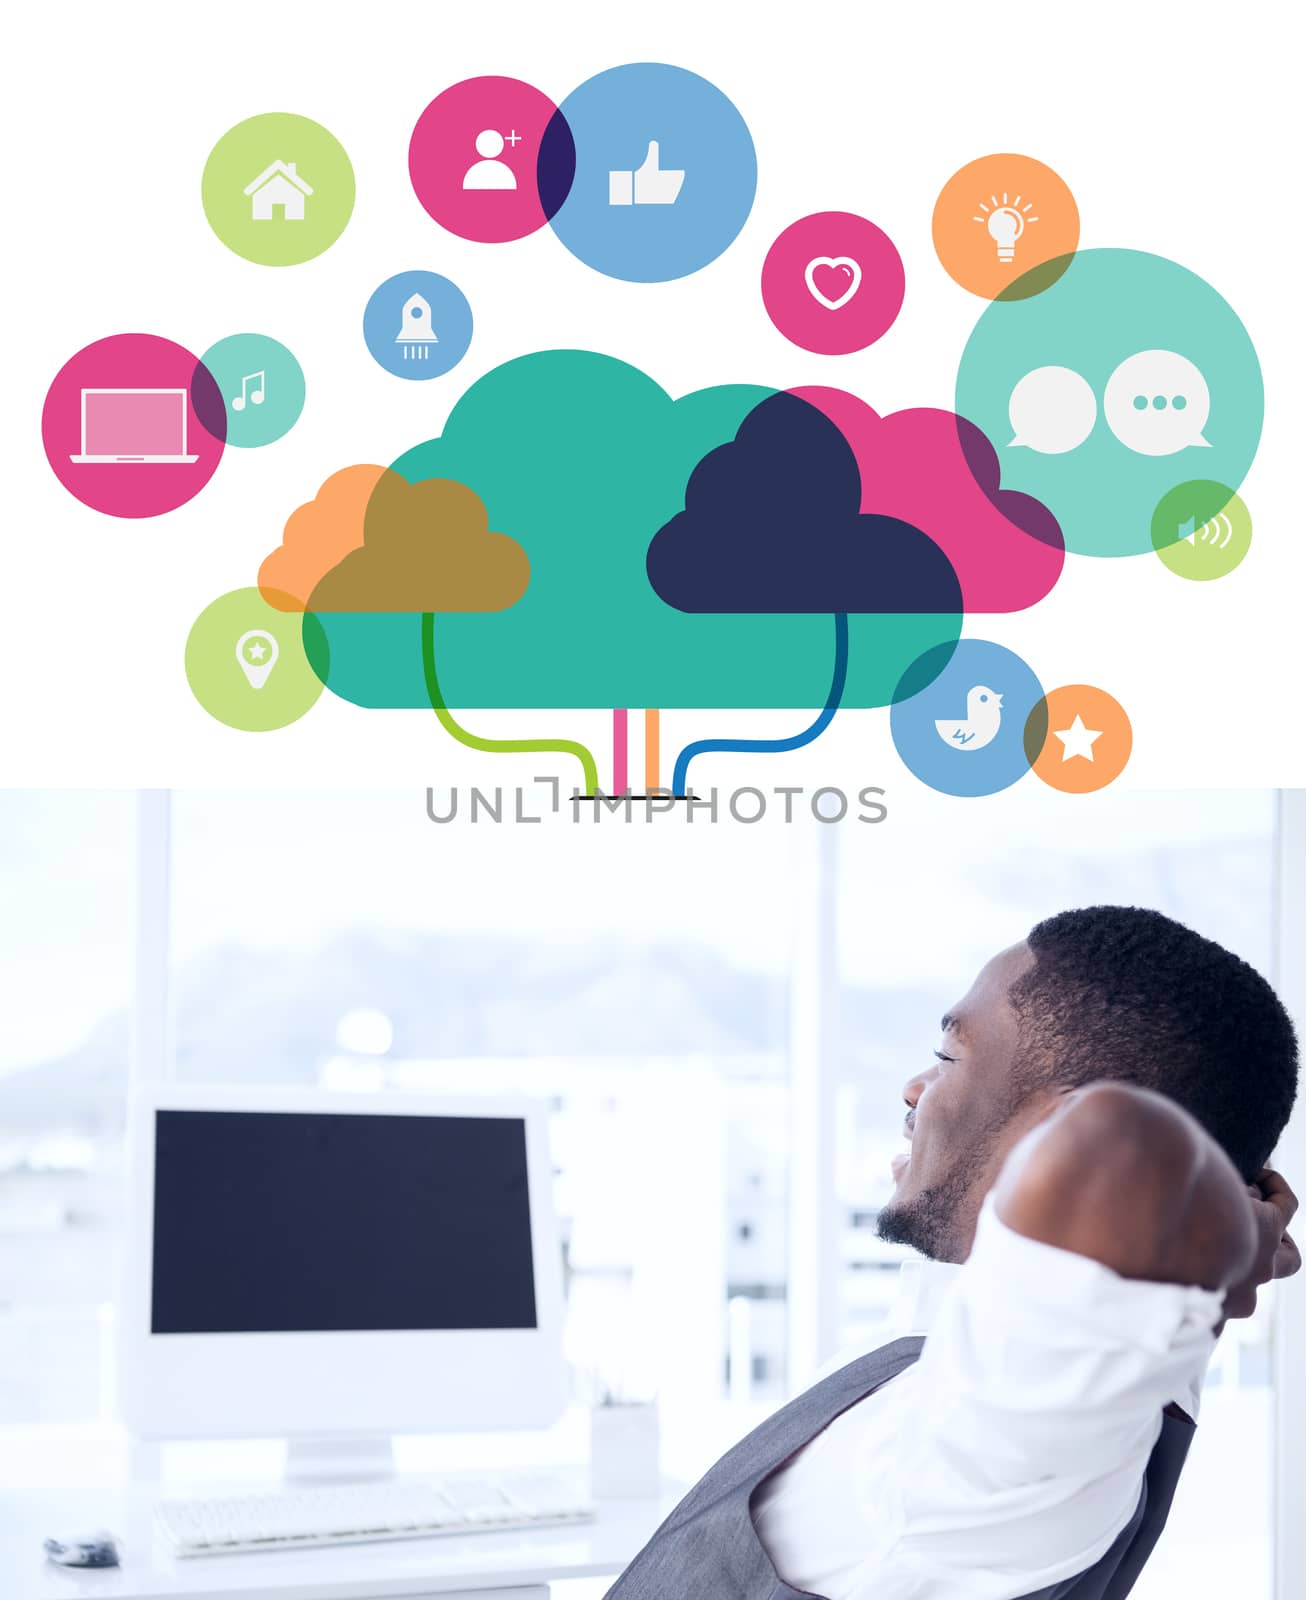 Composite image of apps and cloud computing concept by Wavebreakmedia